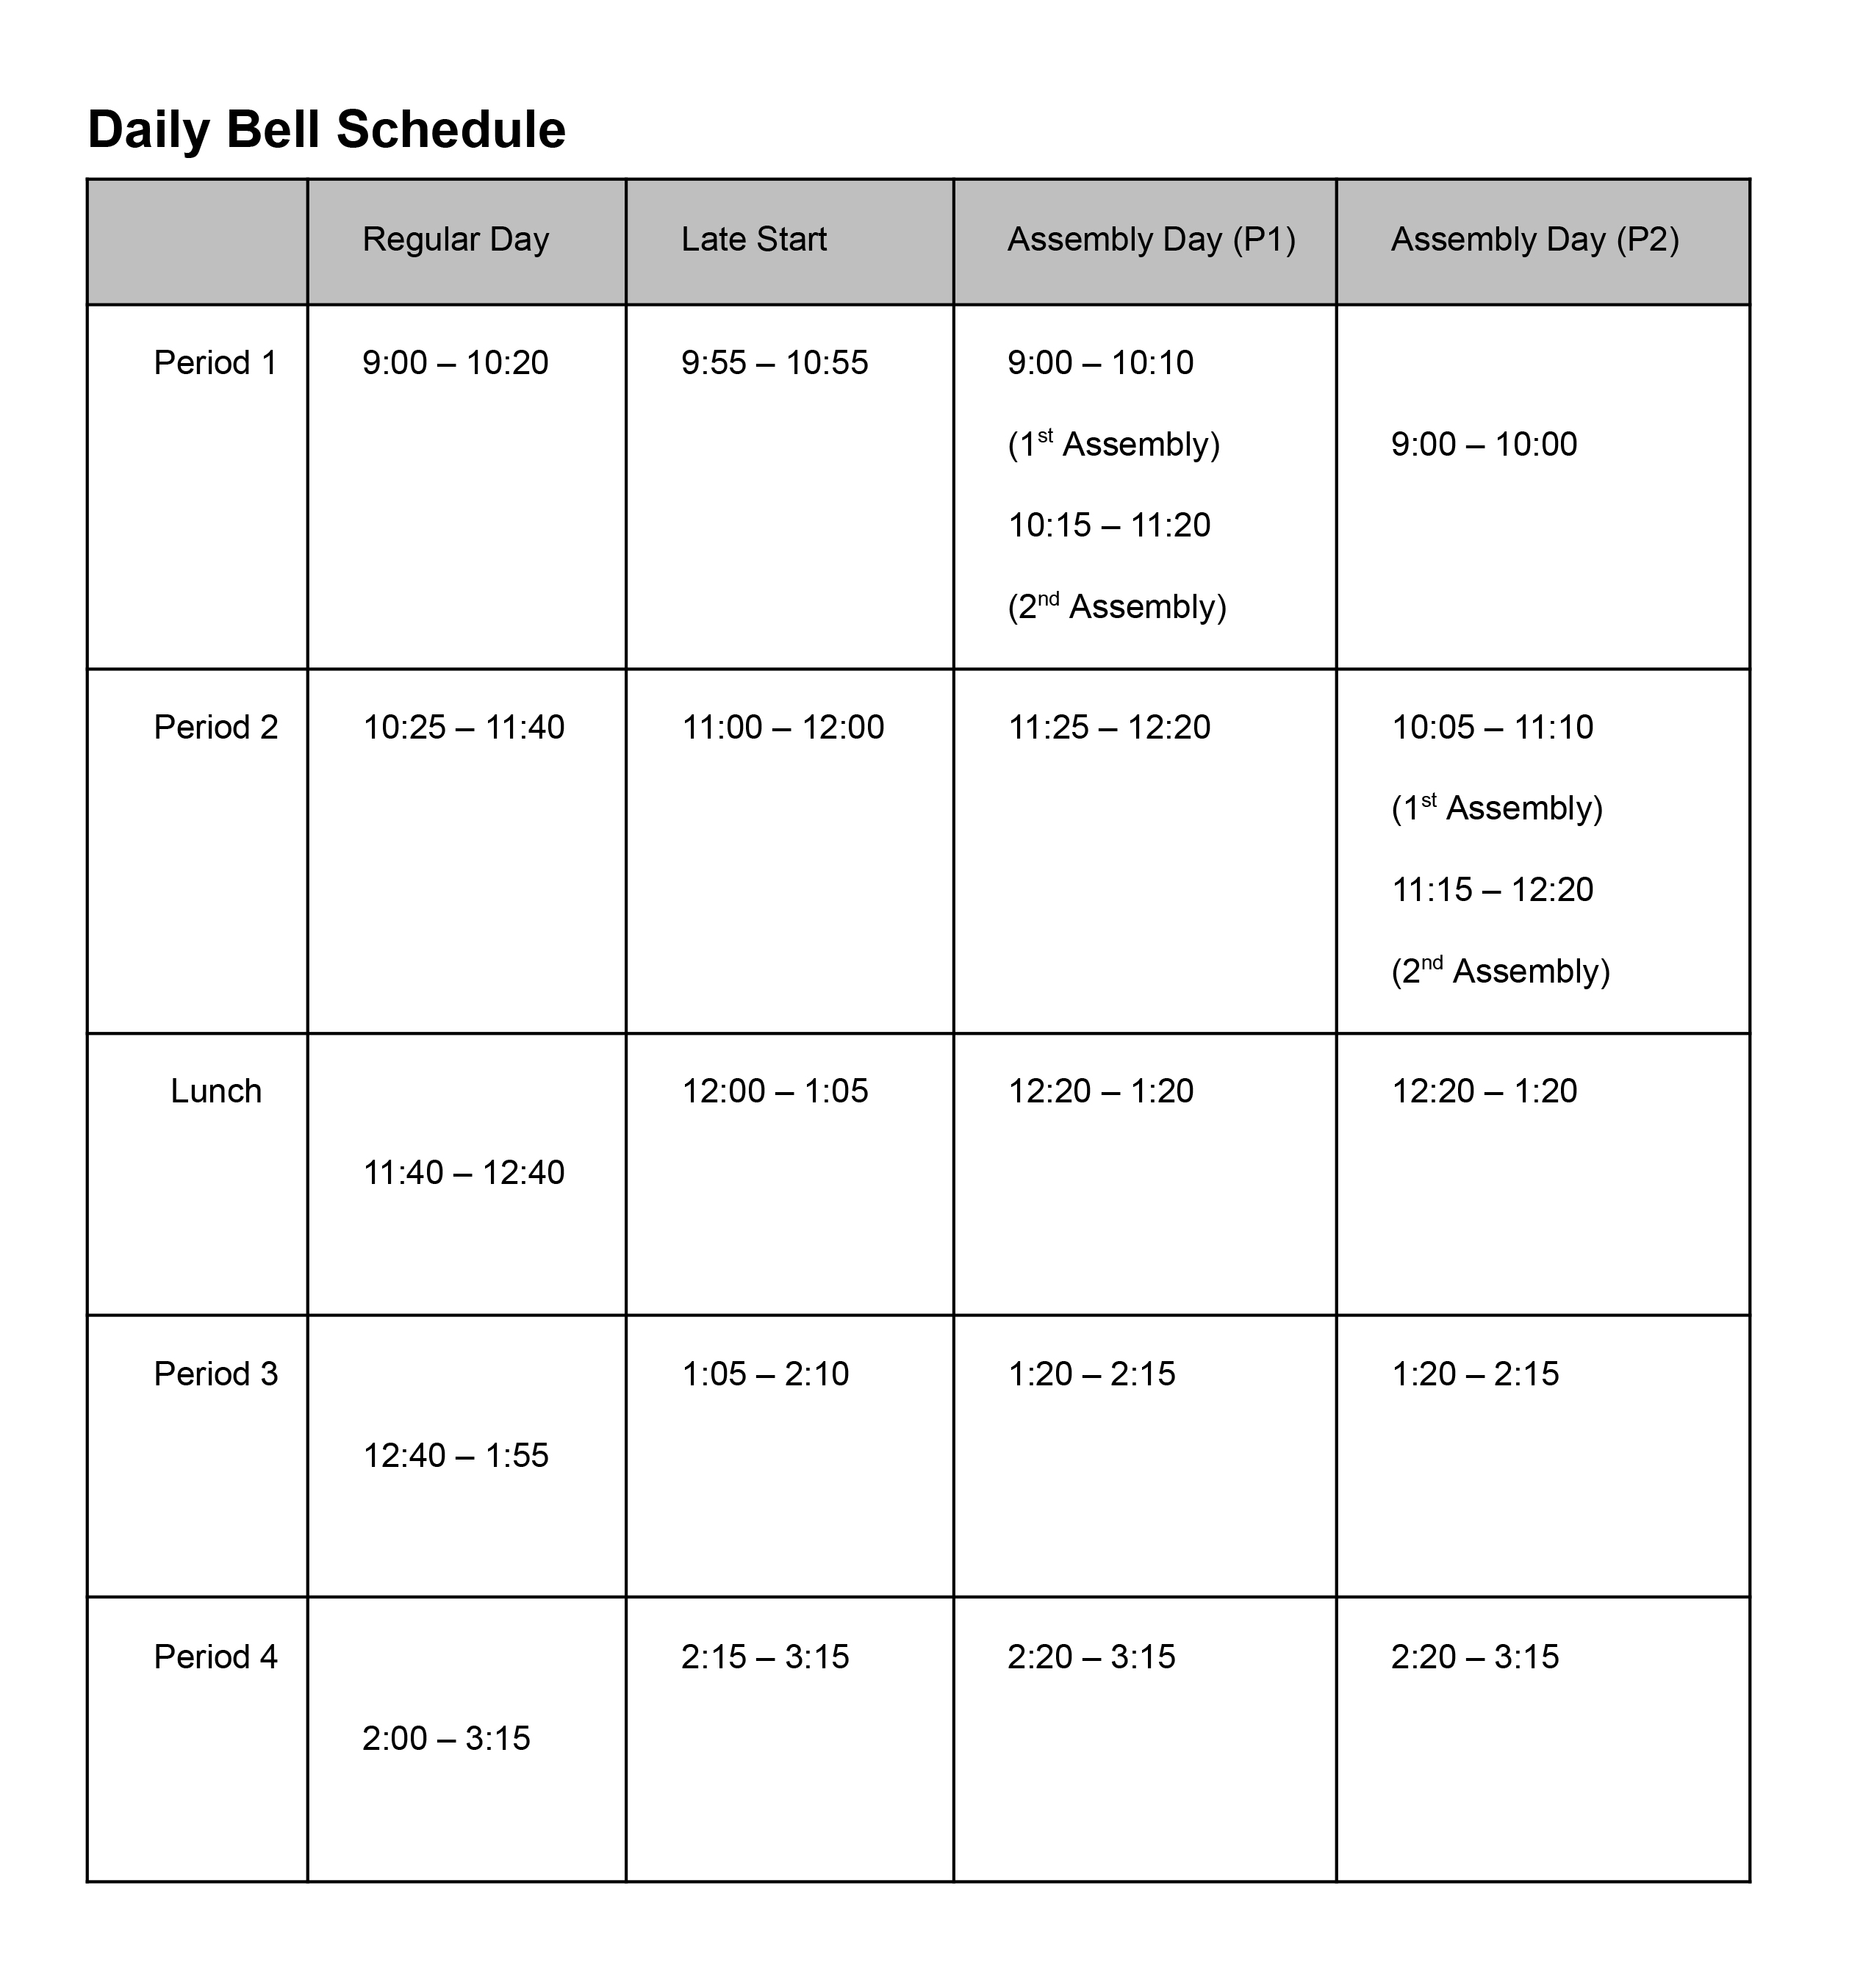 Daily Schedule 1